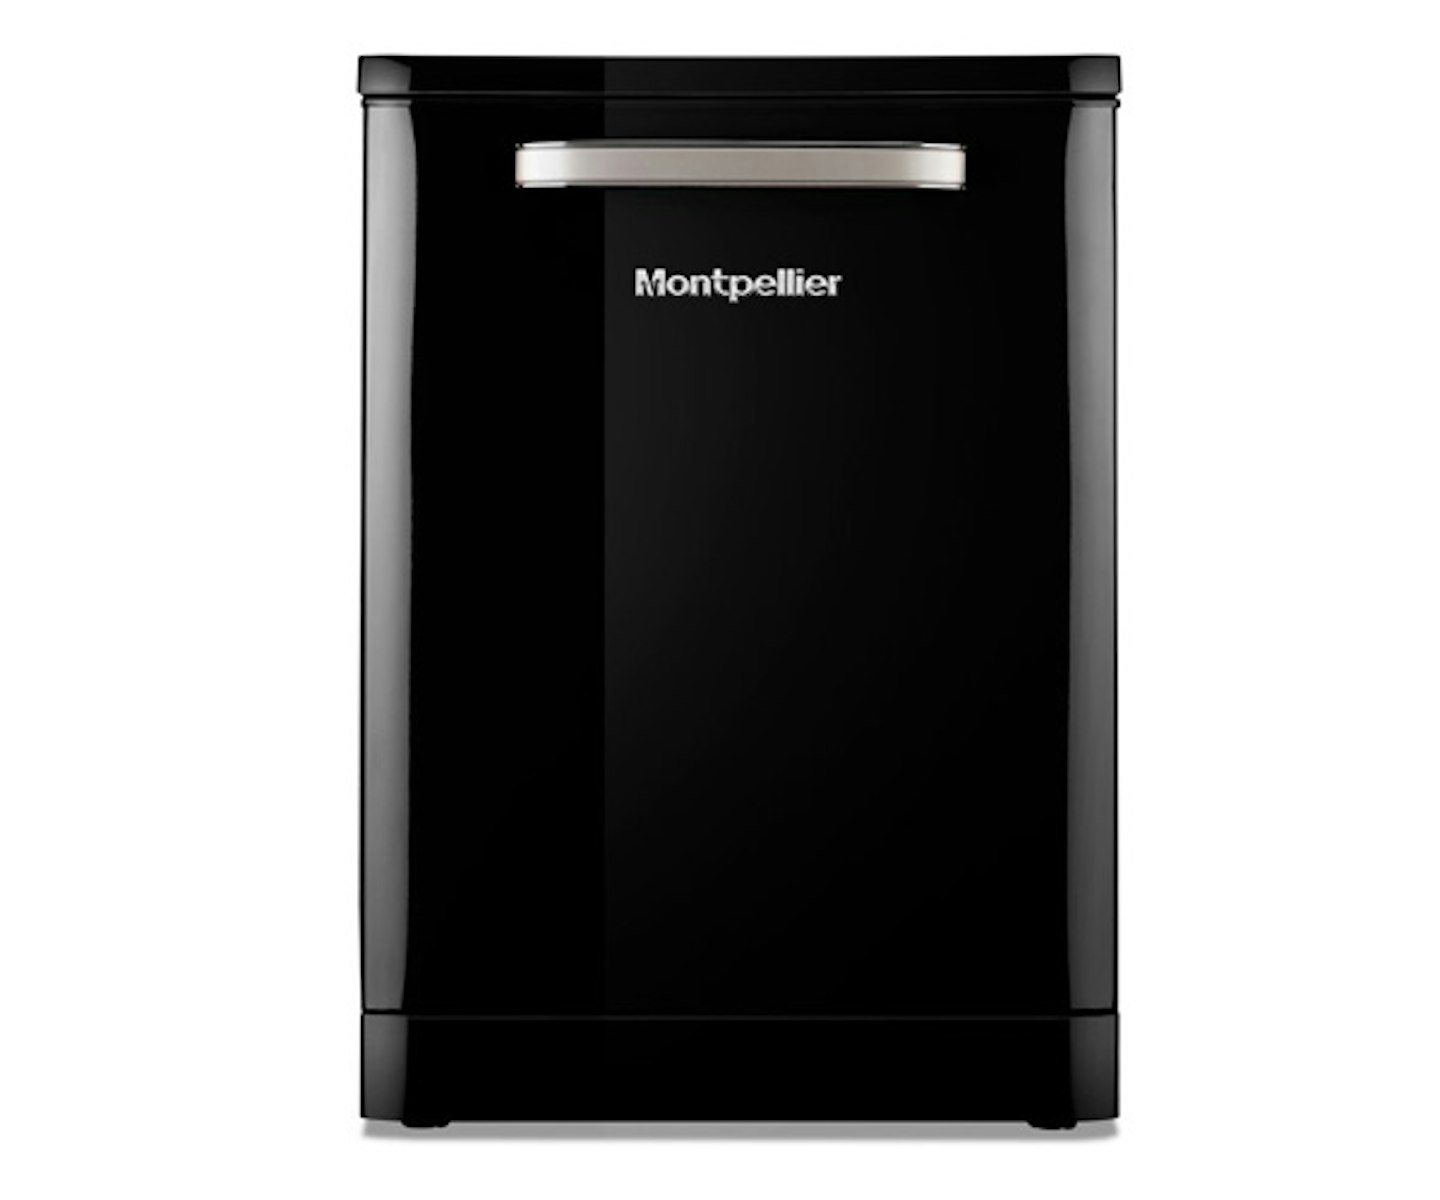 Montpellier 13 Place Settings Freestanding Dishwasher 